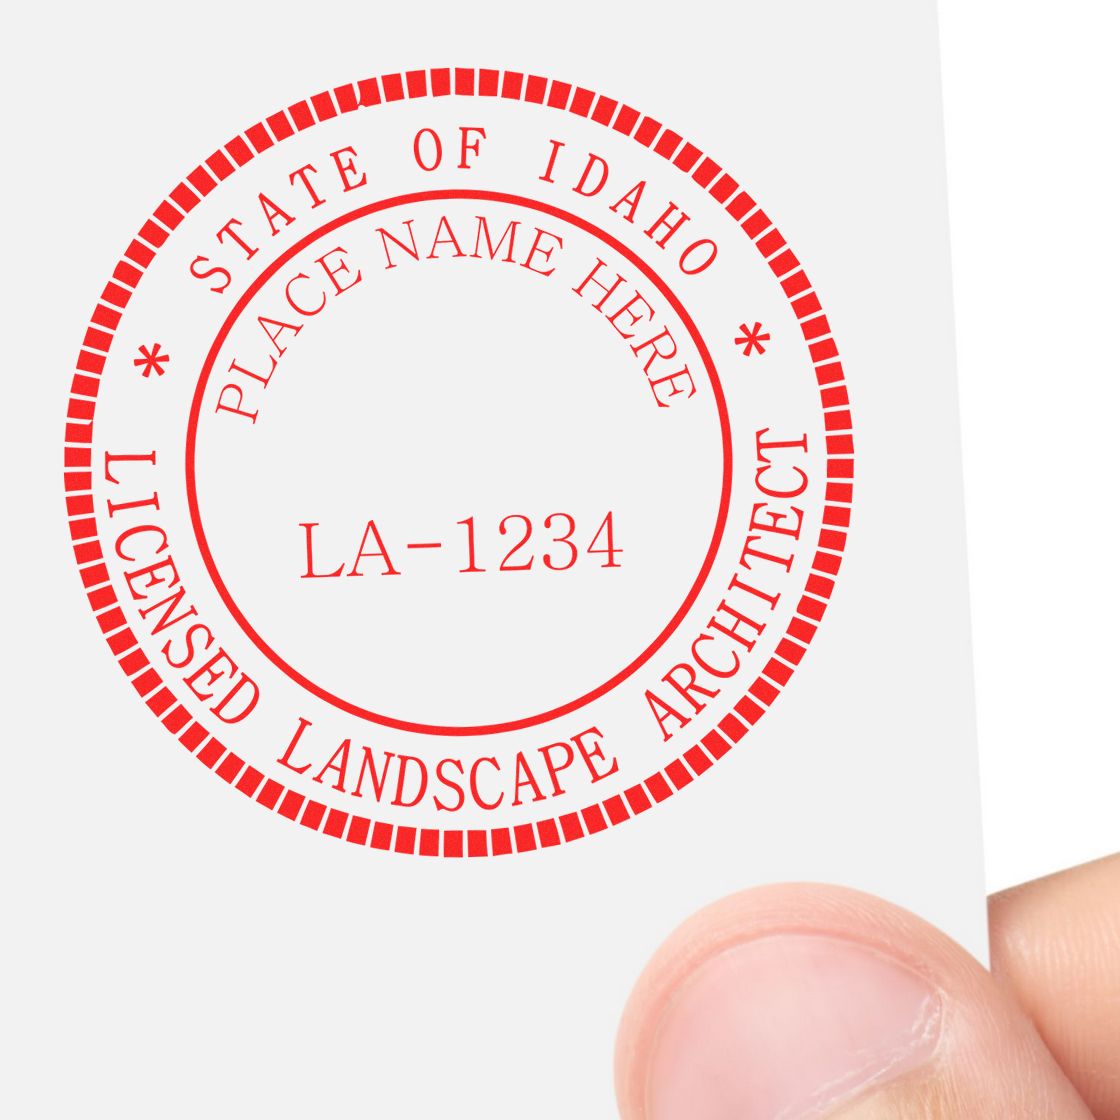 The Idaho Landscape Architectural Seal Stamp stamp impression comes to life with a crisp, detailed photo on paper - showcasing true professional quality.